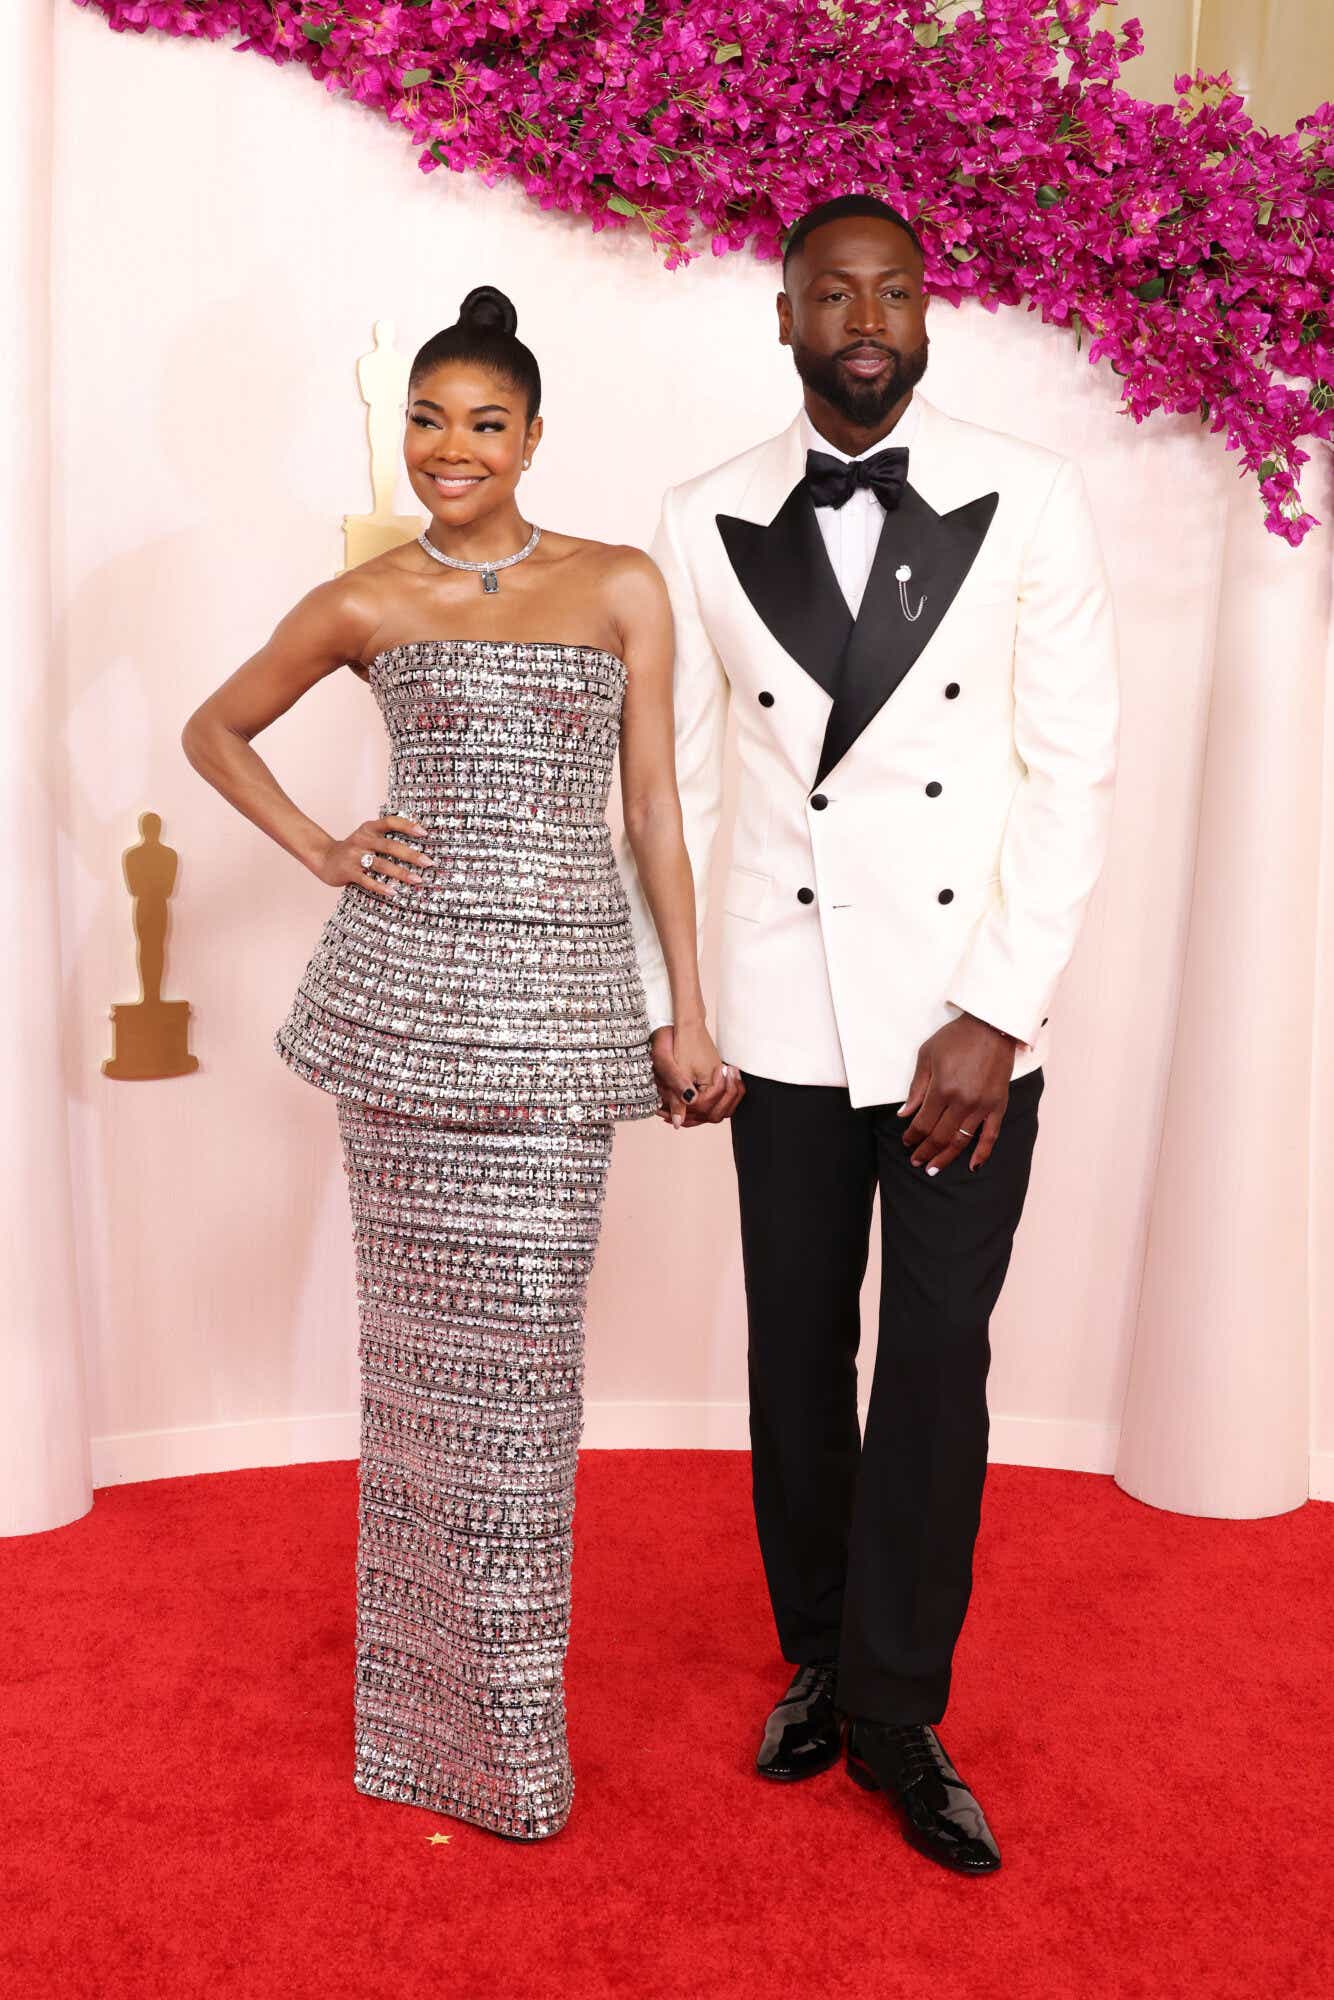 Gabrielle Union wears a bejeweled silver gown that's stapless with a peplum skirt. Dwyane Wade wears a white tux jacket and black trousers with a black bowtie.